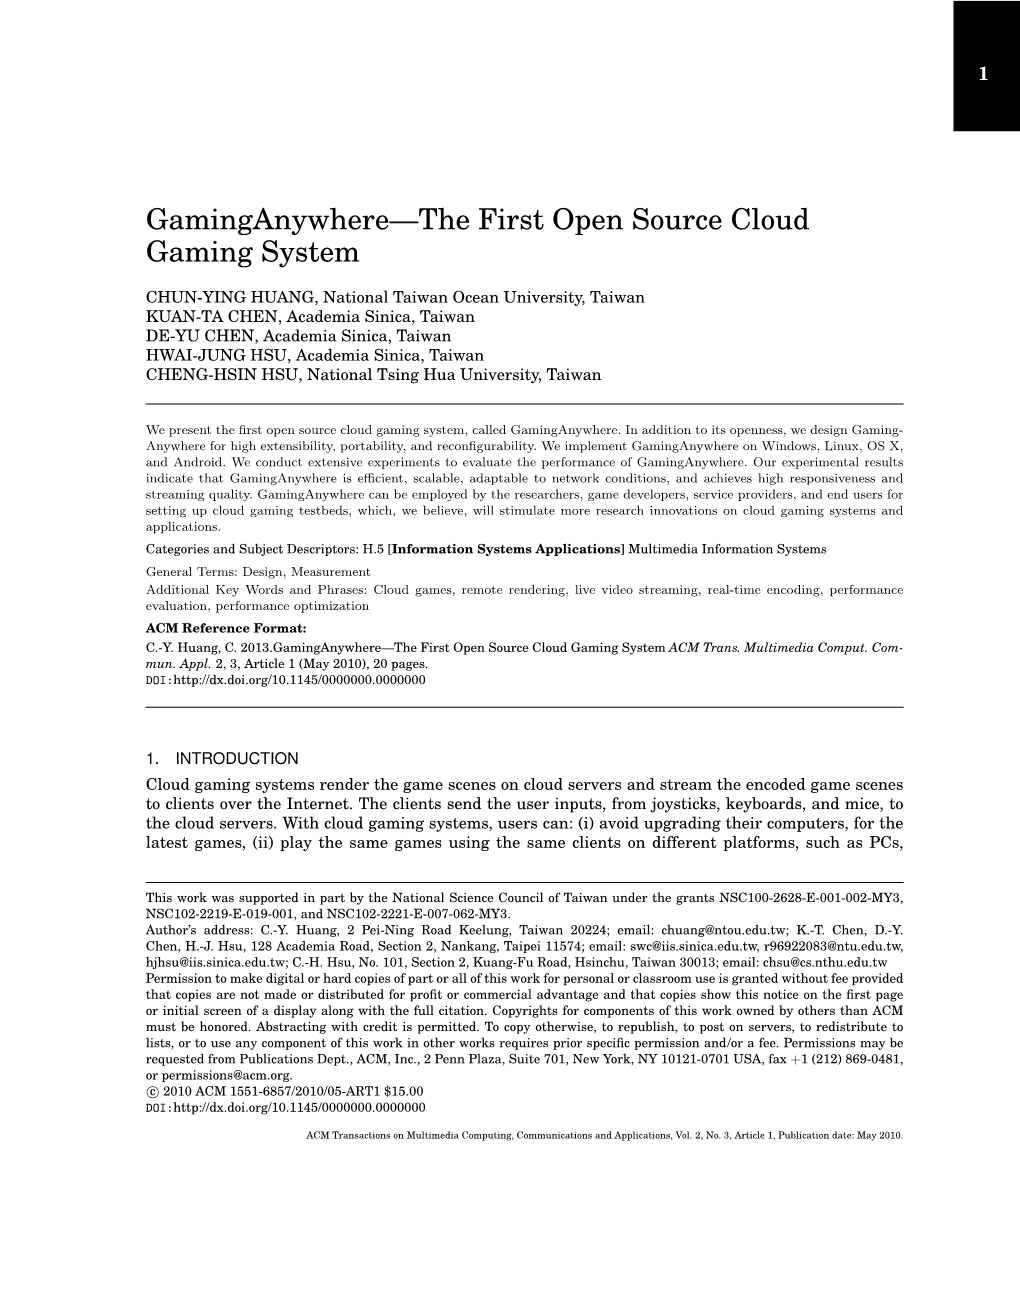 Gaminganywhere—The First Open Source Cloud Gaming System